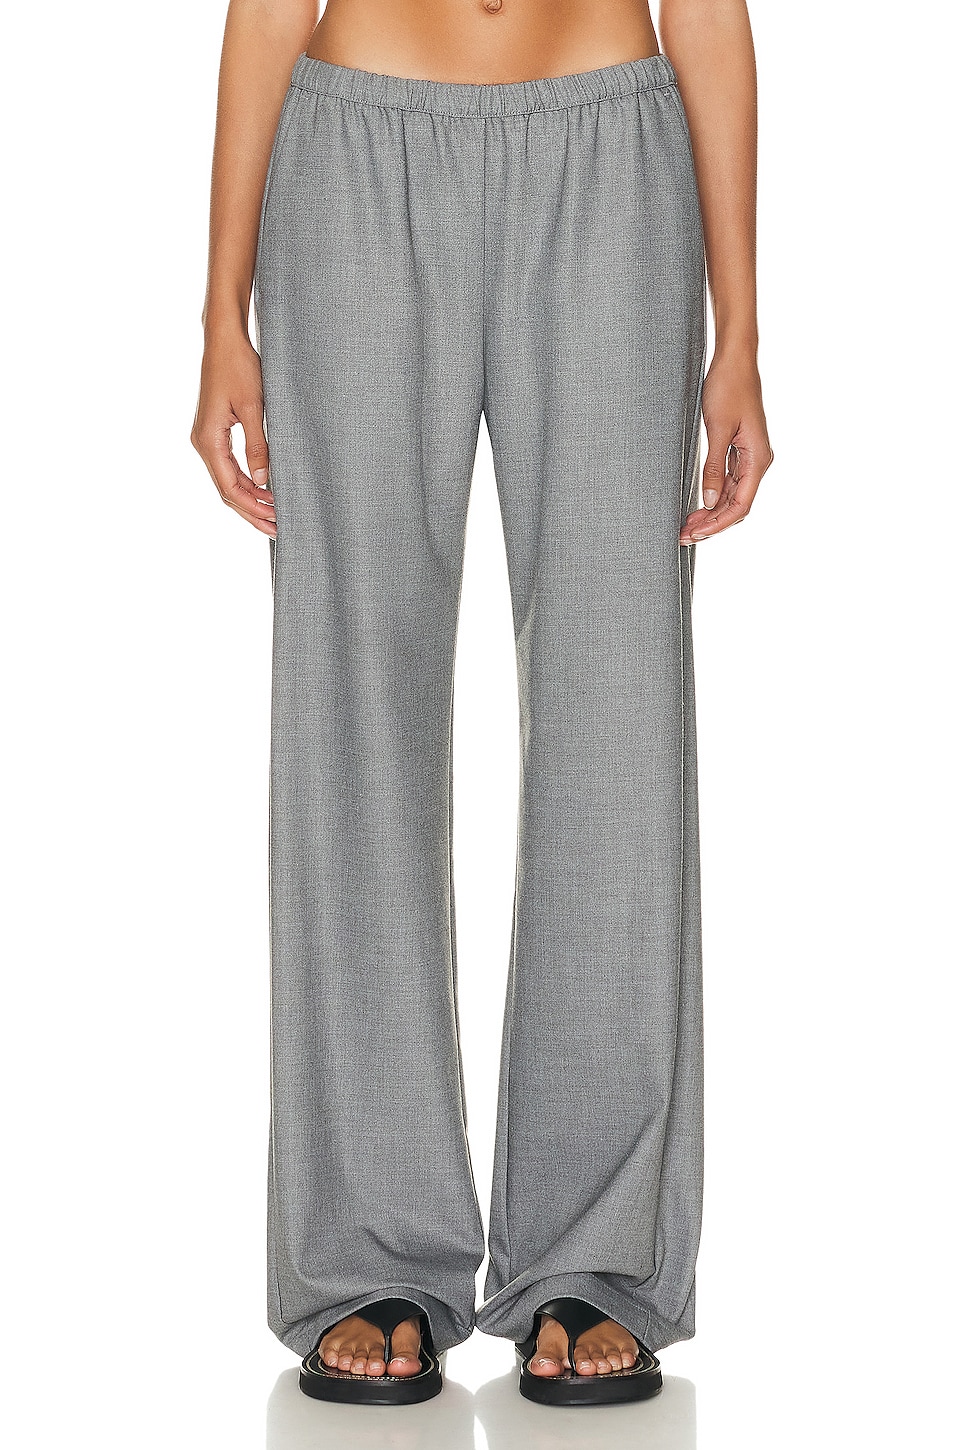 Image 1 of Enza Costa Everywhere Suit Pant in Light Grey